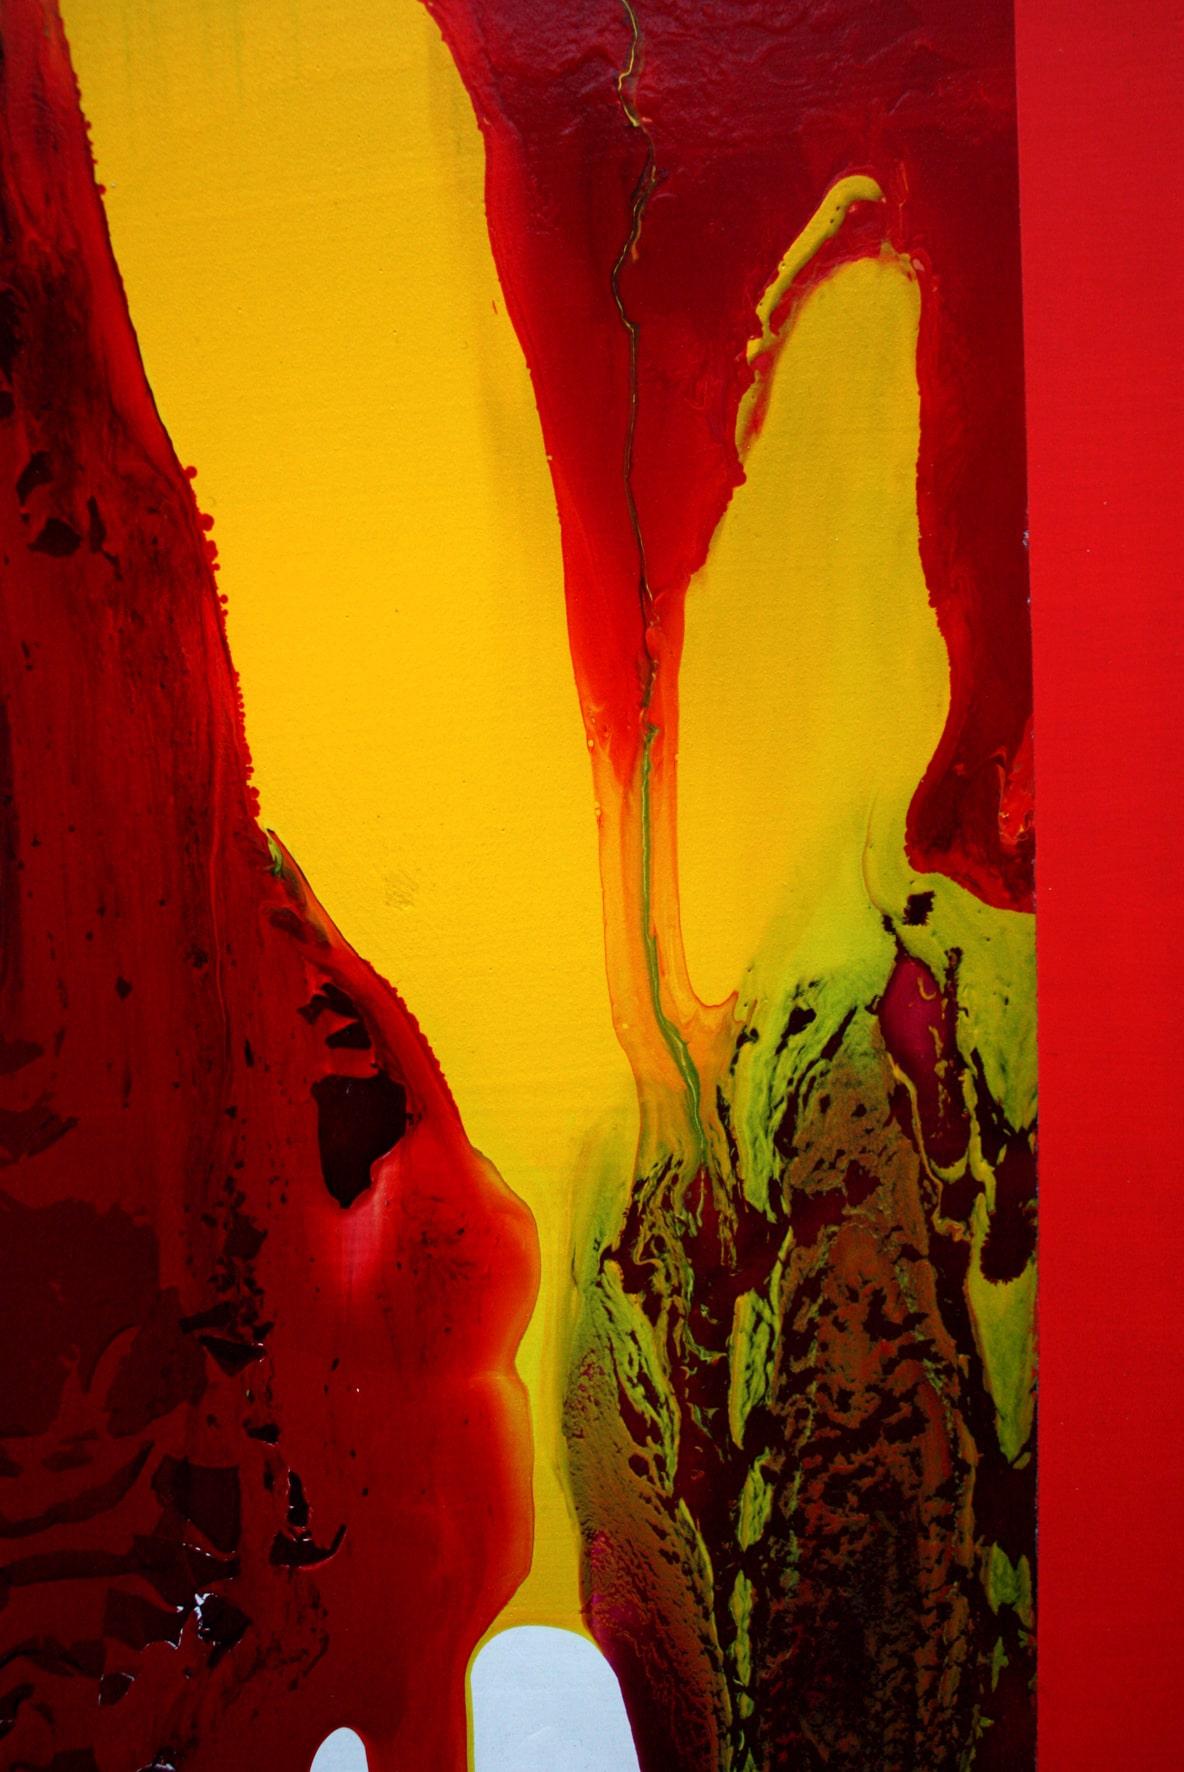 d0709-6 is an artwork by contemporary artist Ahn Hyun-Ju which is part of the “Dripping” series. In this series of abstract paintings the artist is toying with the technique of dripping which she combines with color fields. What intrigues her about